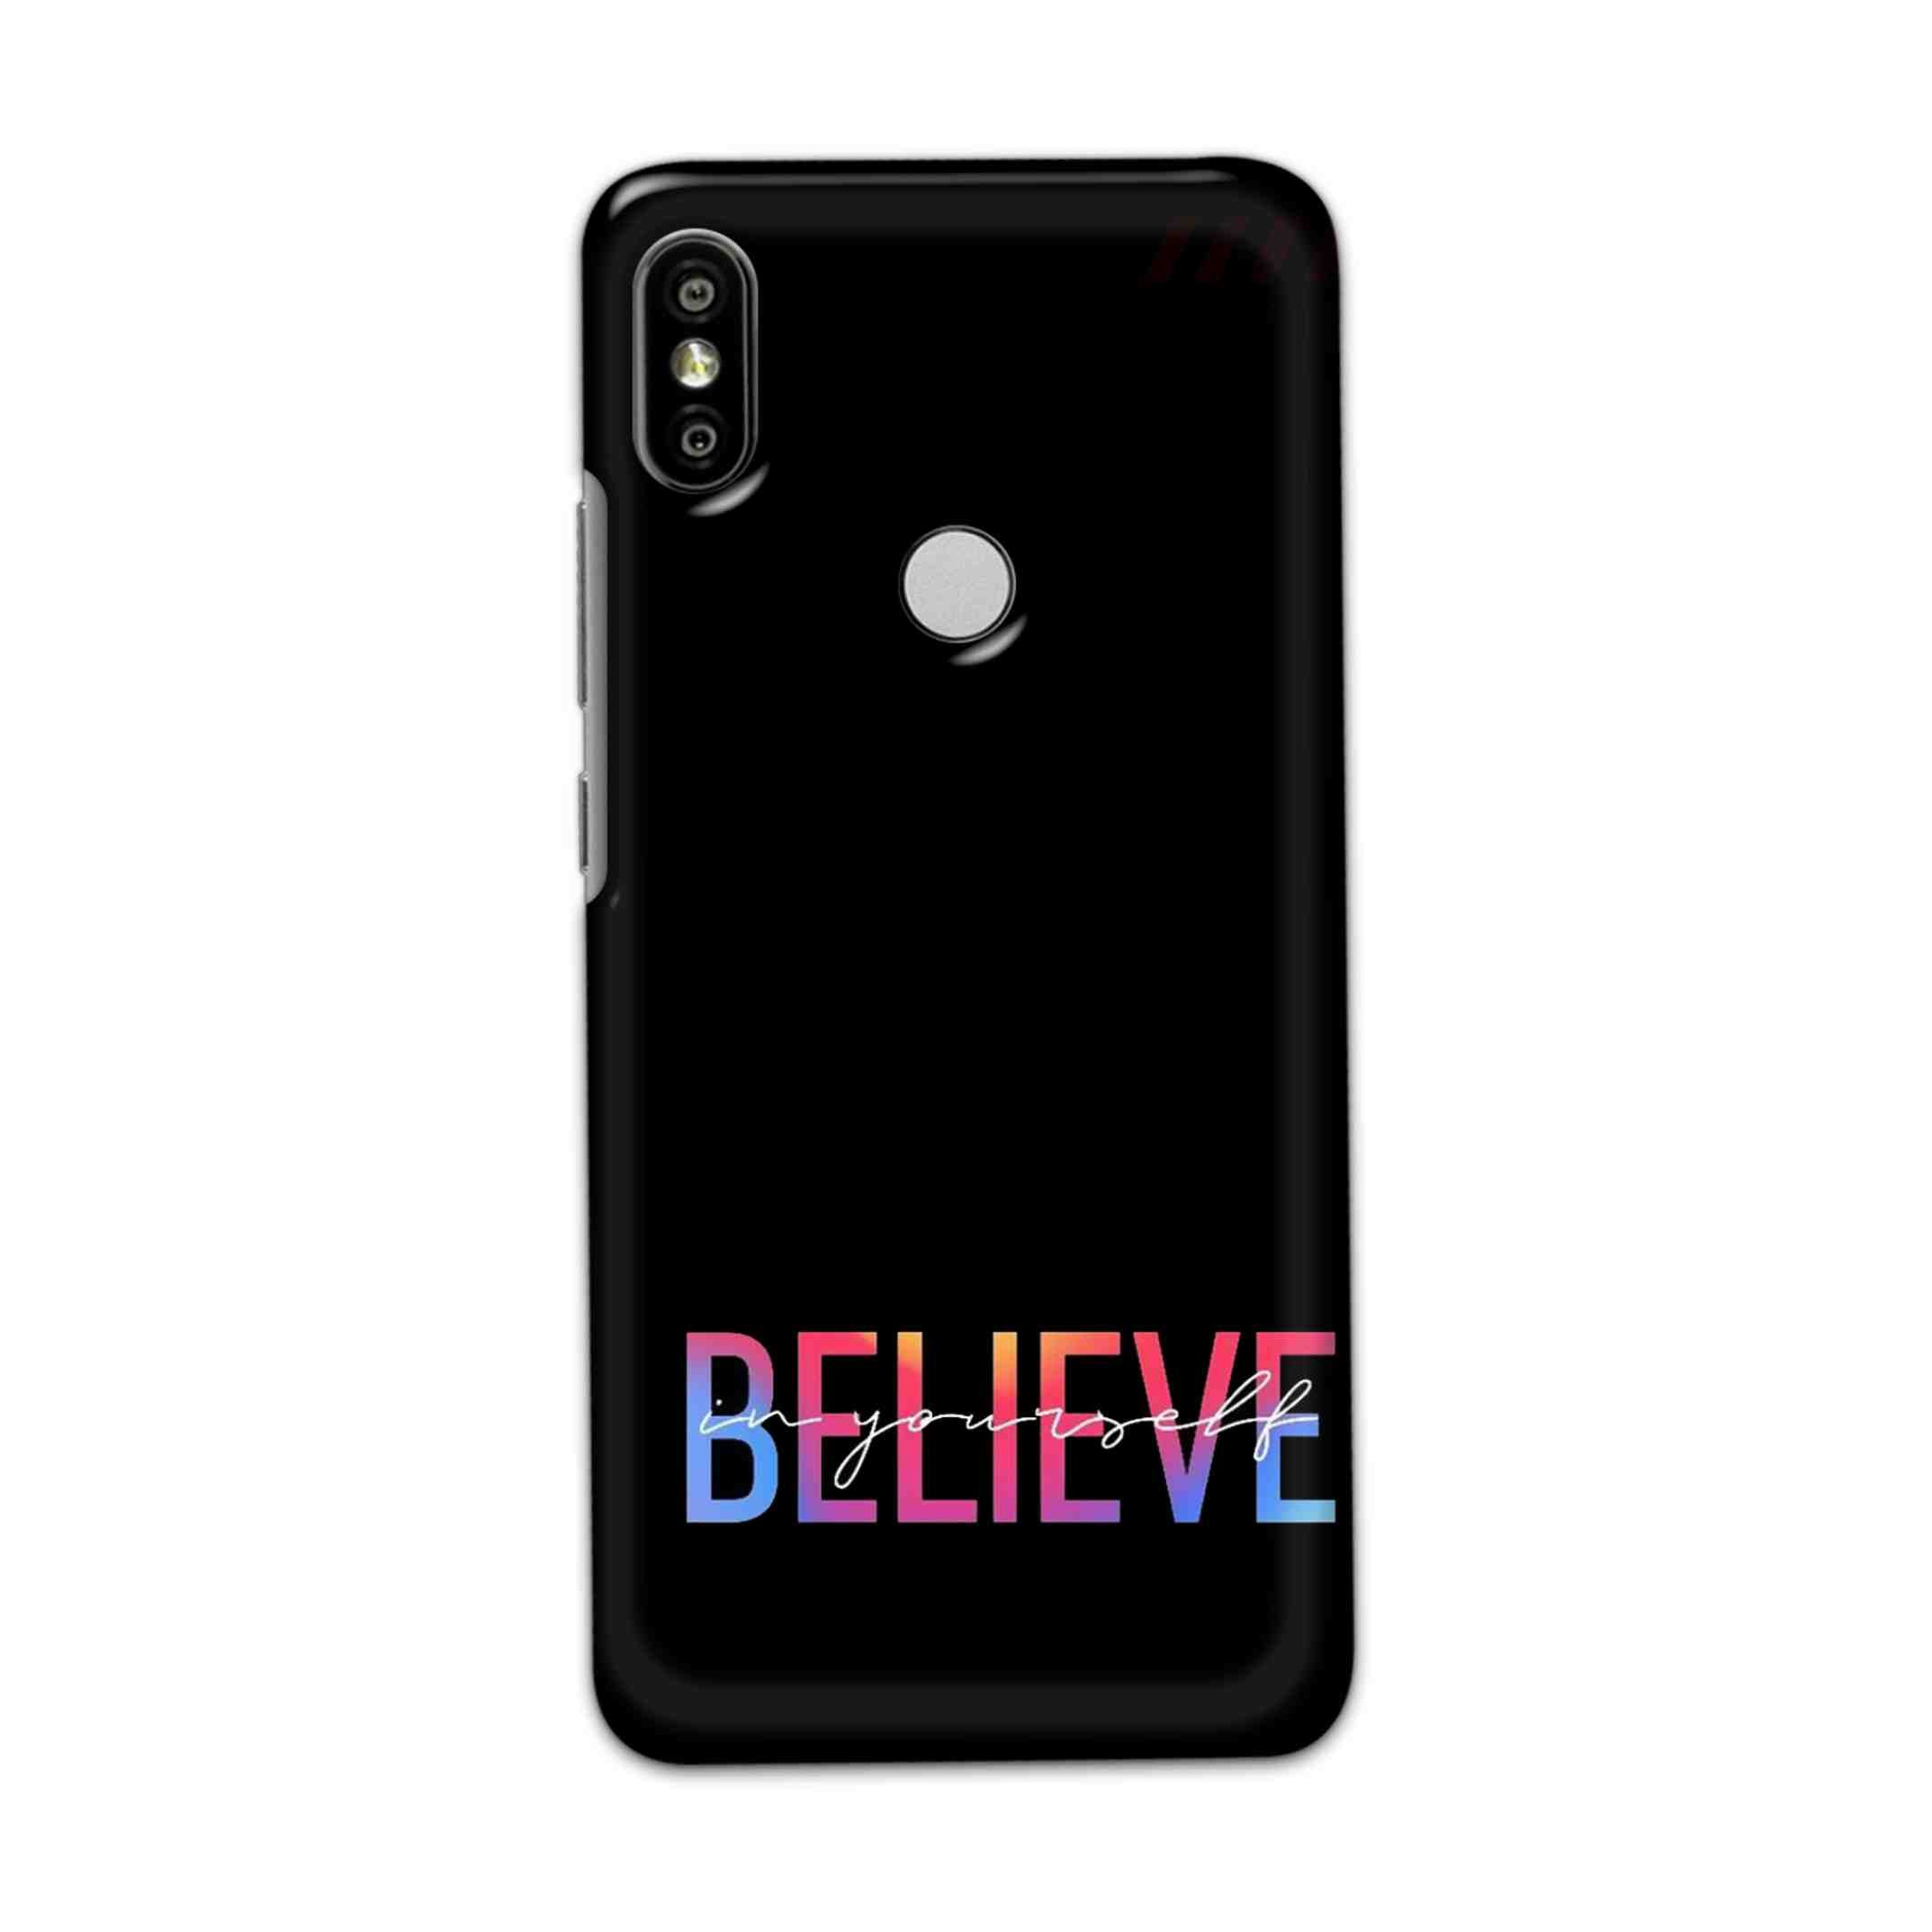 Buy Believe Hard Back Mobile Phone Case Cover For Redmi S2 / Y2 Online